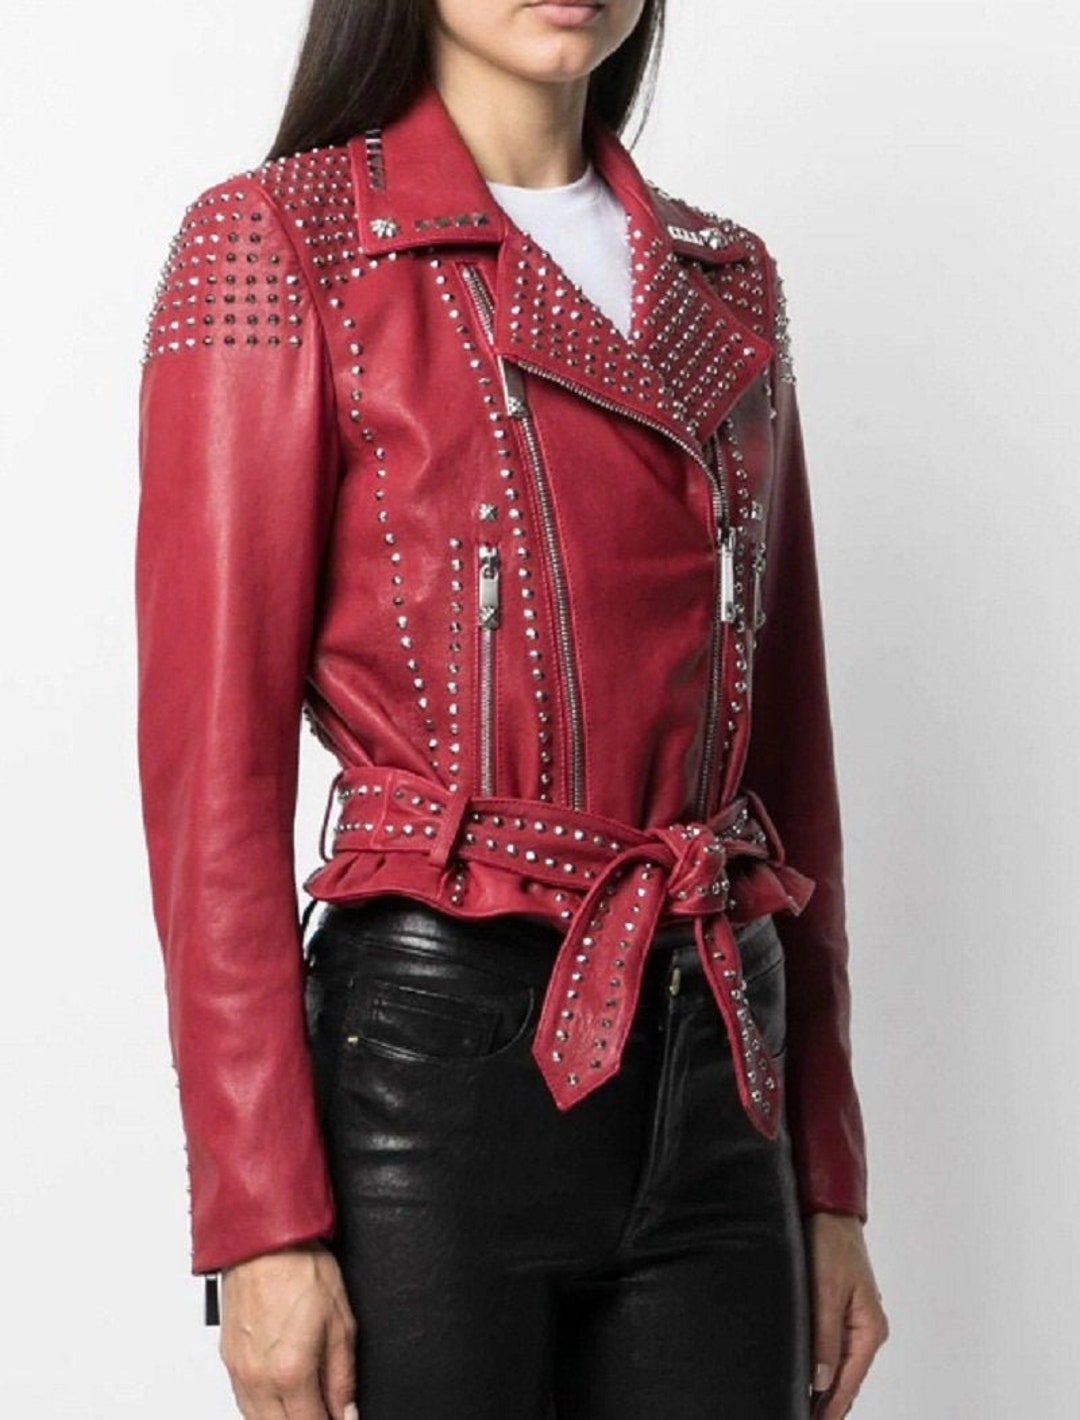 Women Customize Red Studded Pockets Lambskin Leather Bikers - Etsy